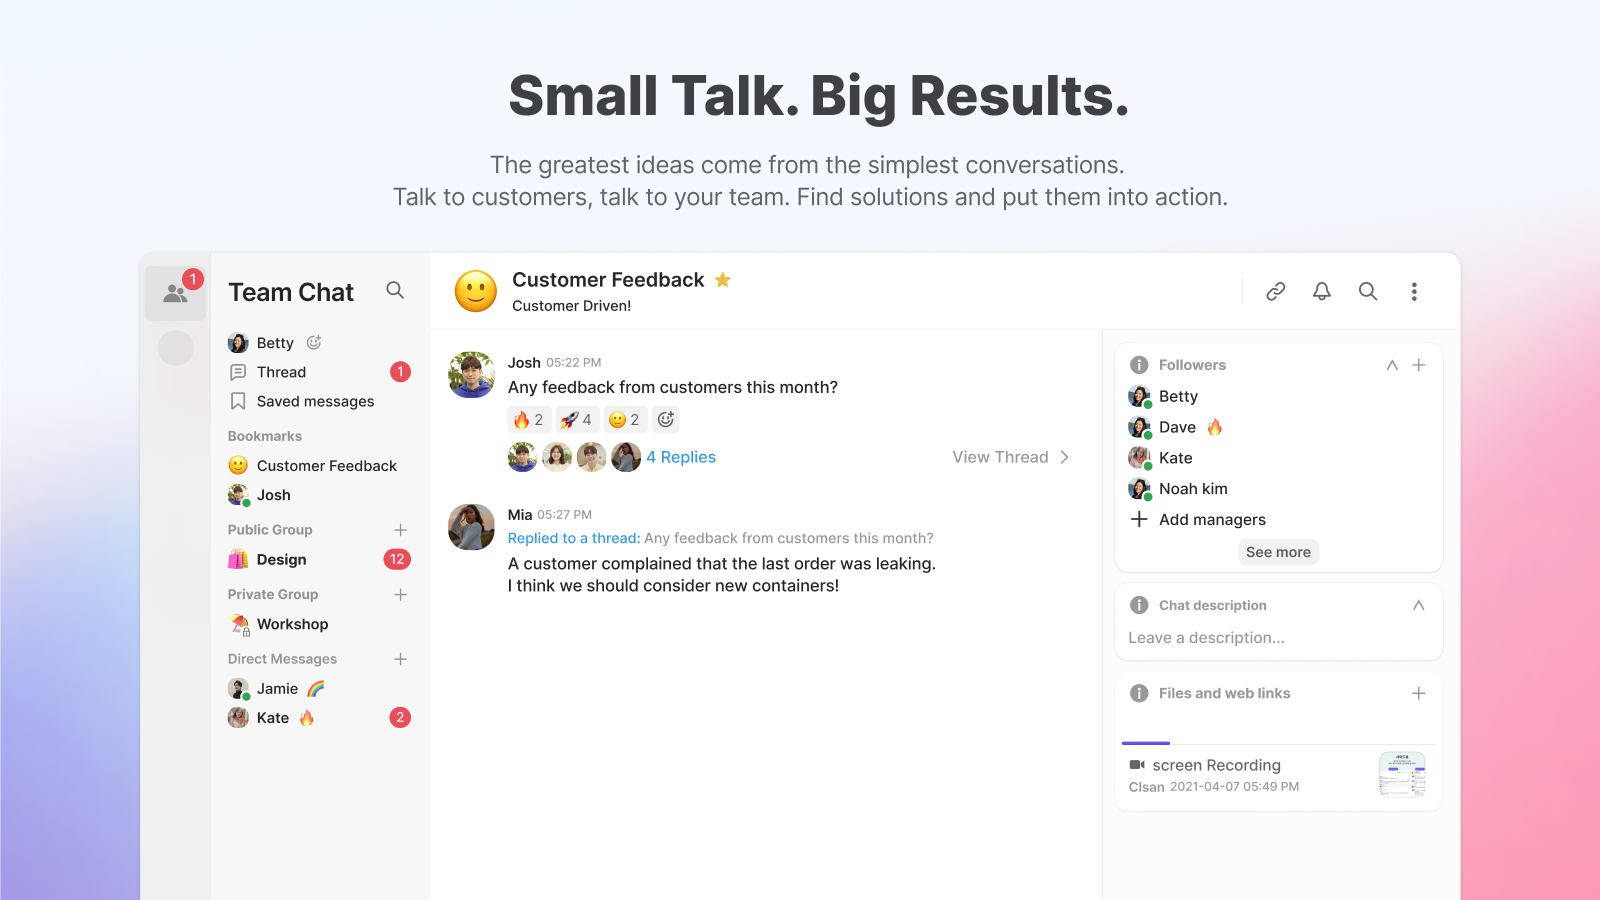 Small Talk. Big Results. - The greatest ideas come from the simplest conversations. Talk to customers, talk to your team. Find solutions and put them into action.